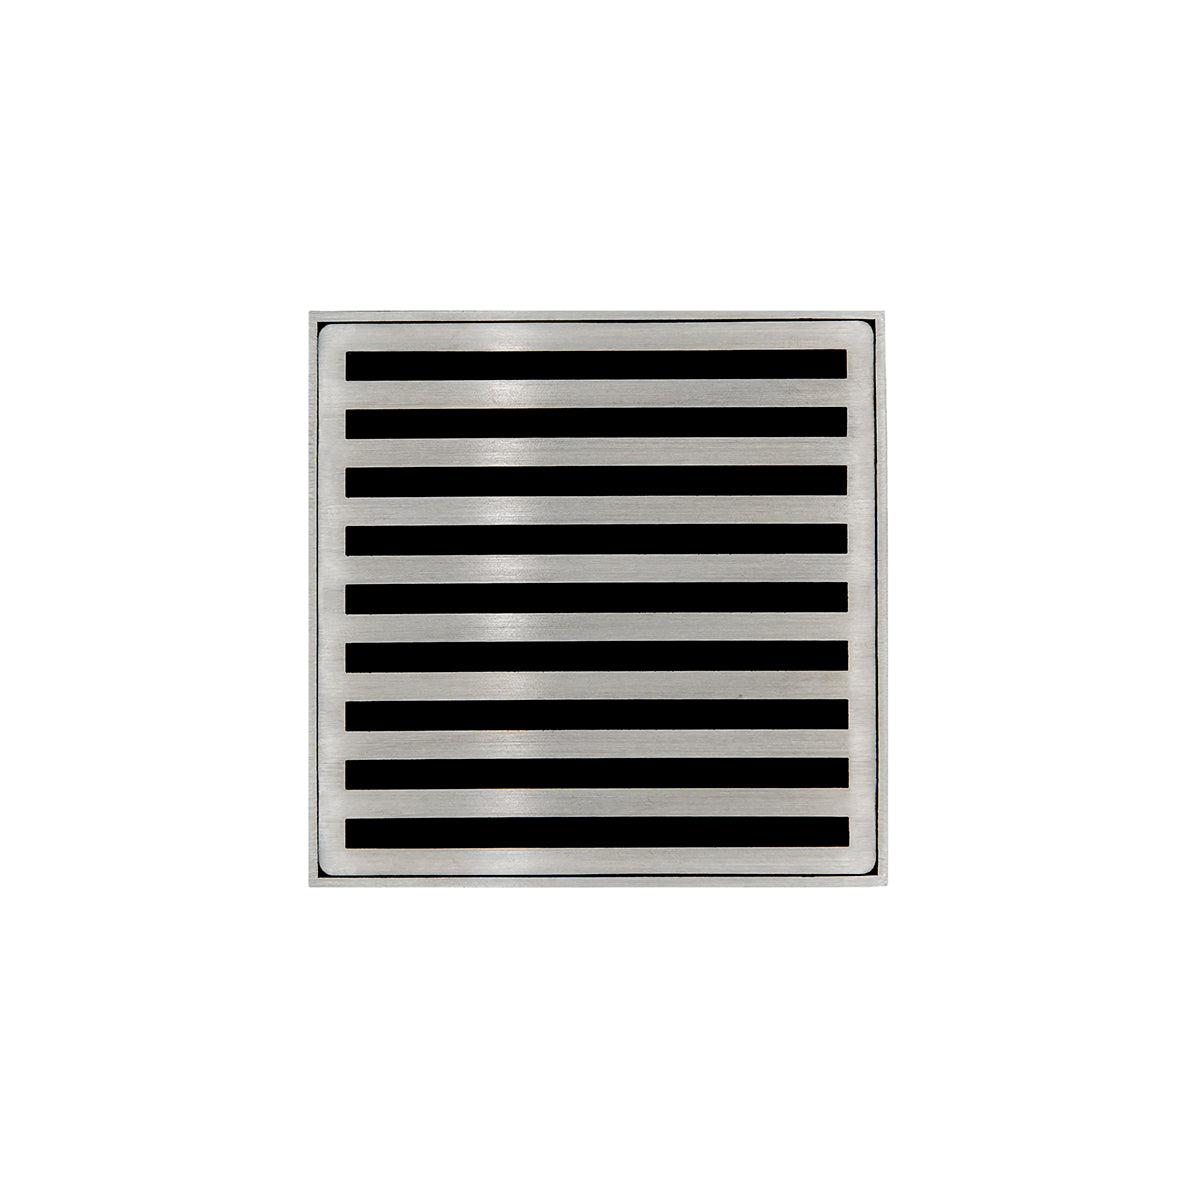 Infinity Drain 5" x 5" NDB 5 Premium Center Drain Kit with Lines Pattern Decorative Plate with ABS Bonded Flange Drain Body, 2", 3" and 4" Outlet